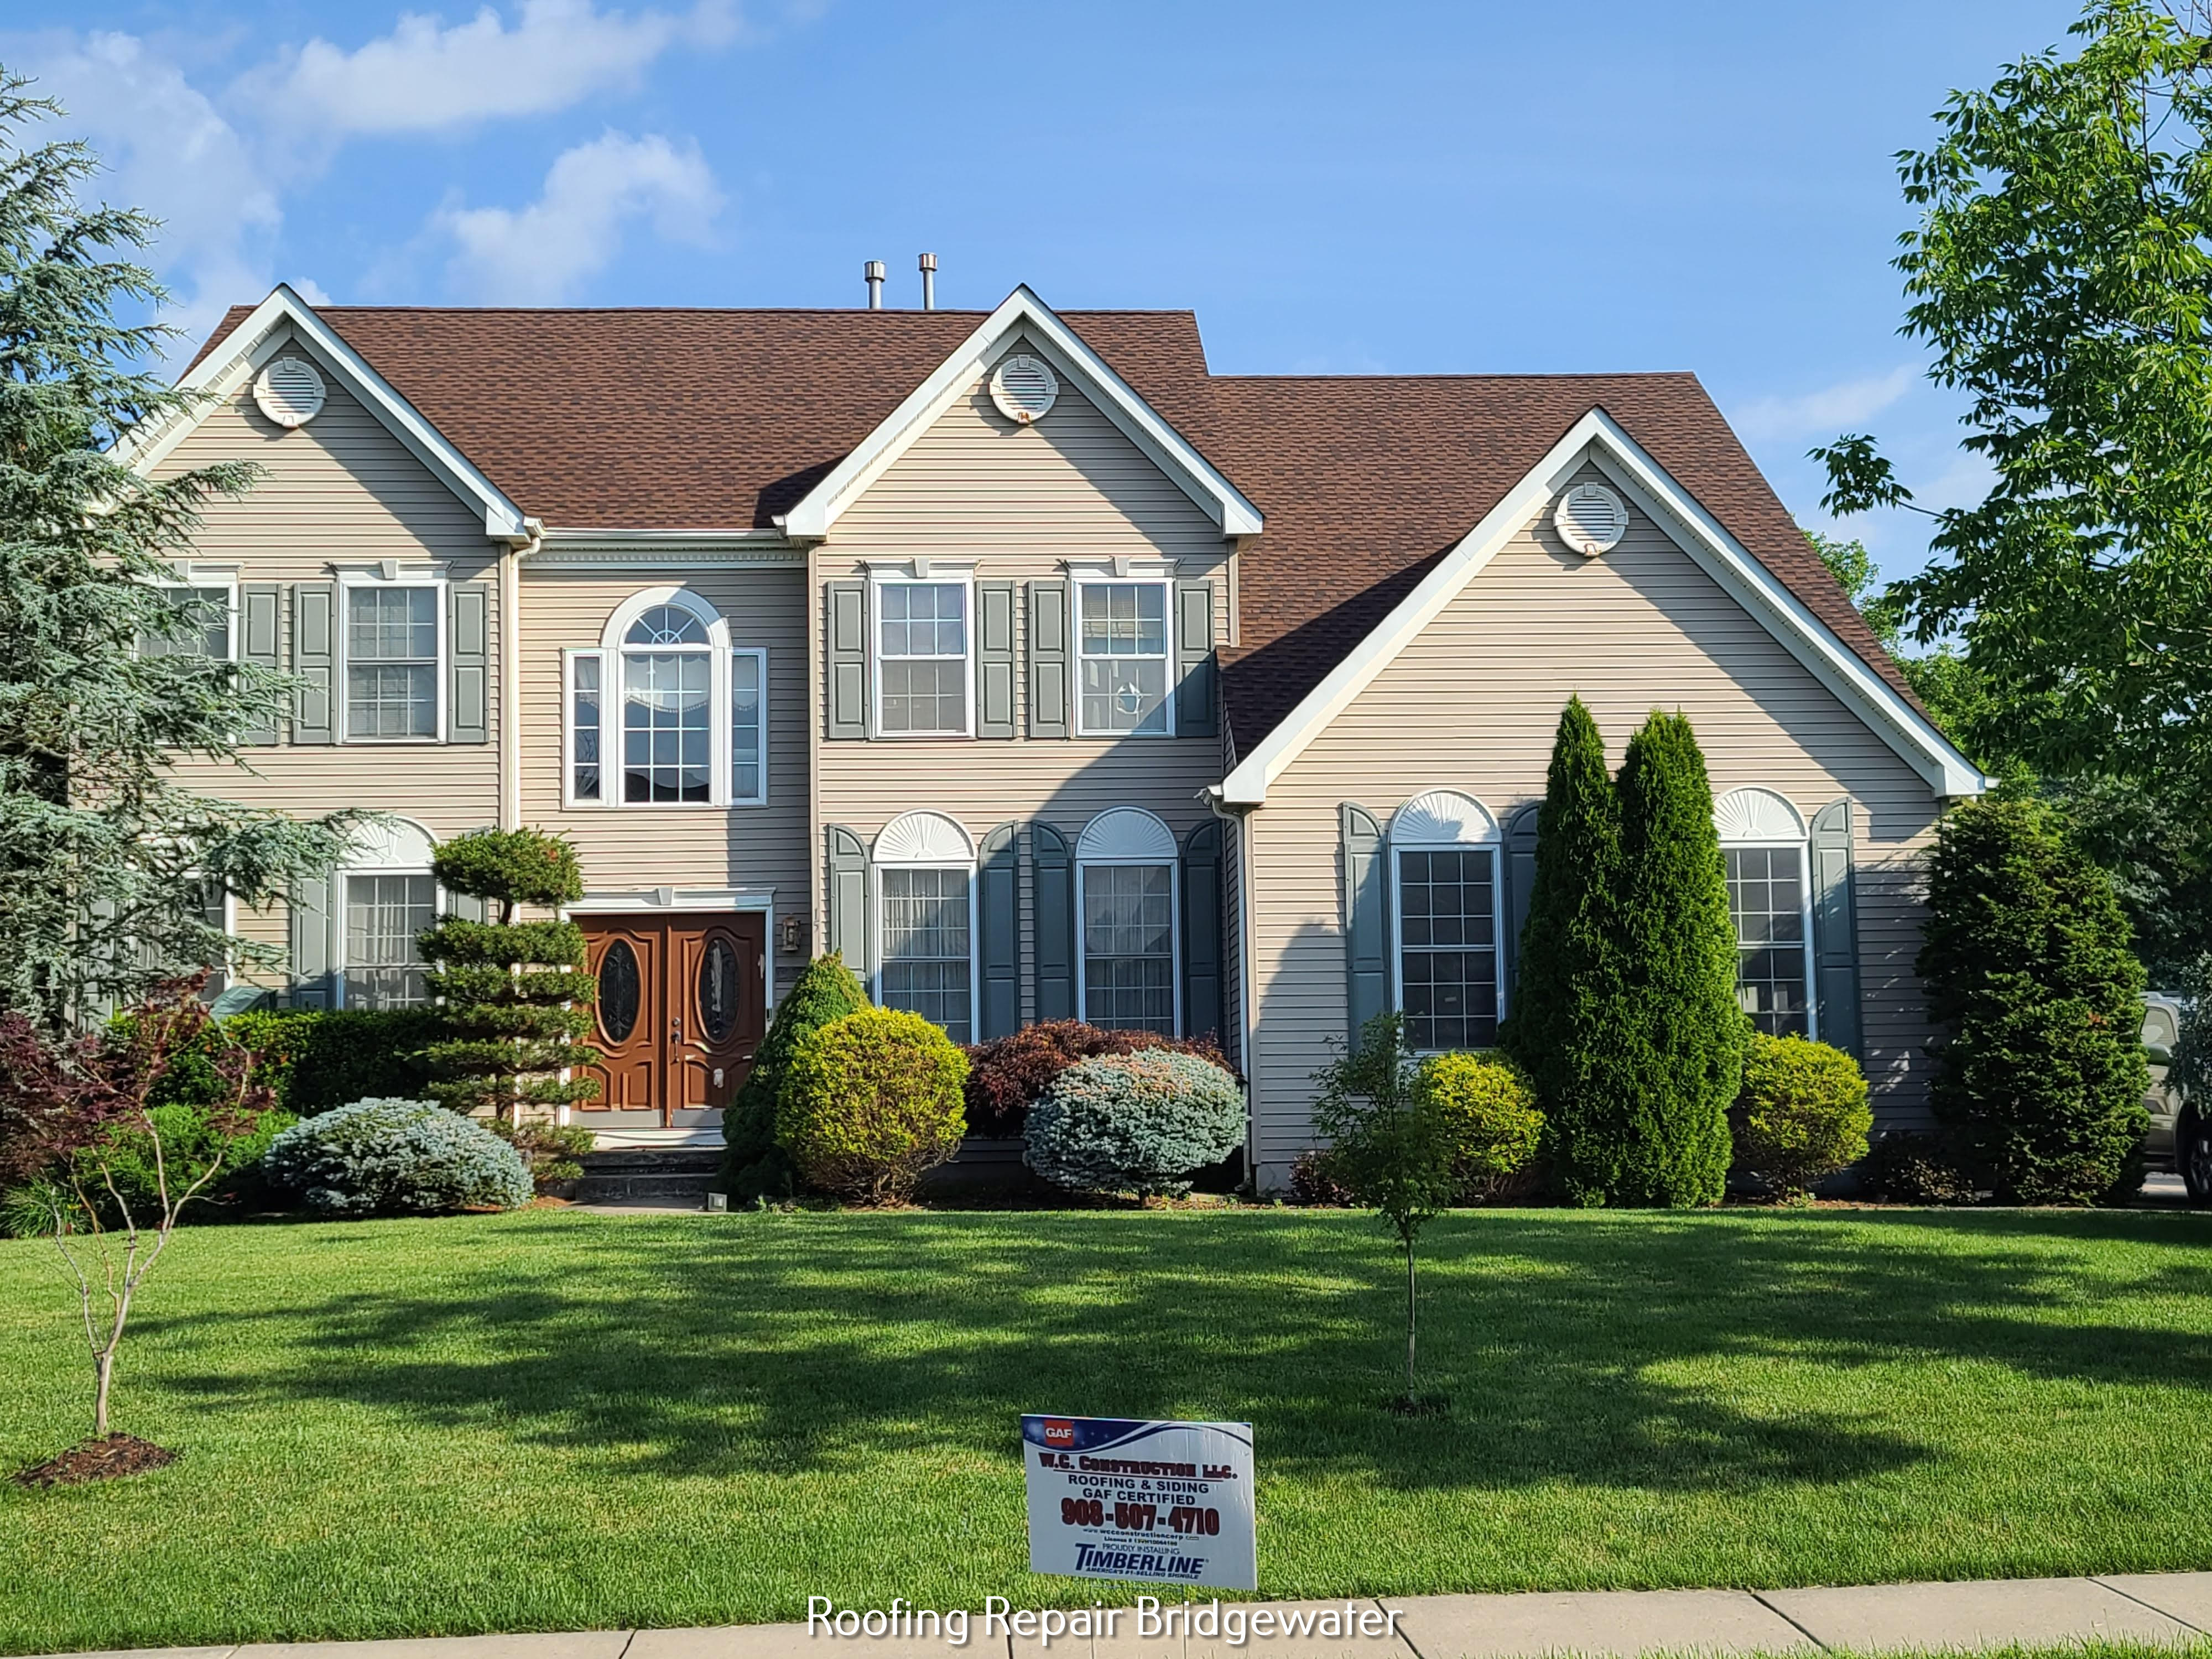 W.C. Construction LLC is New Go-To for All Things Roofing and Siding Installation